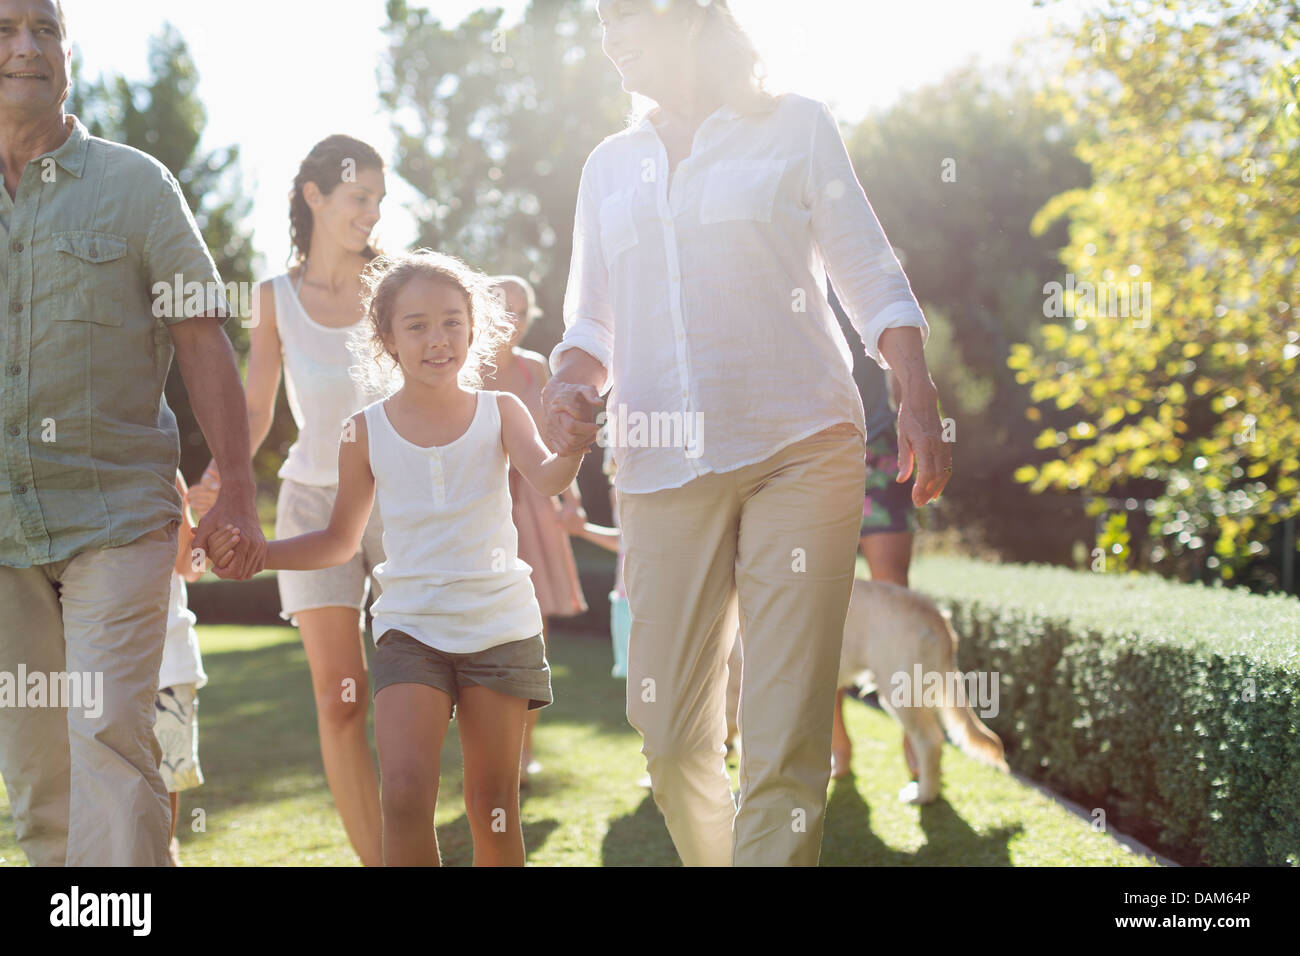 Family walking together in backyard Stock Photo